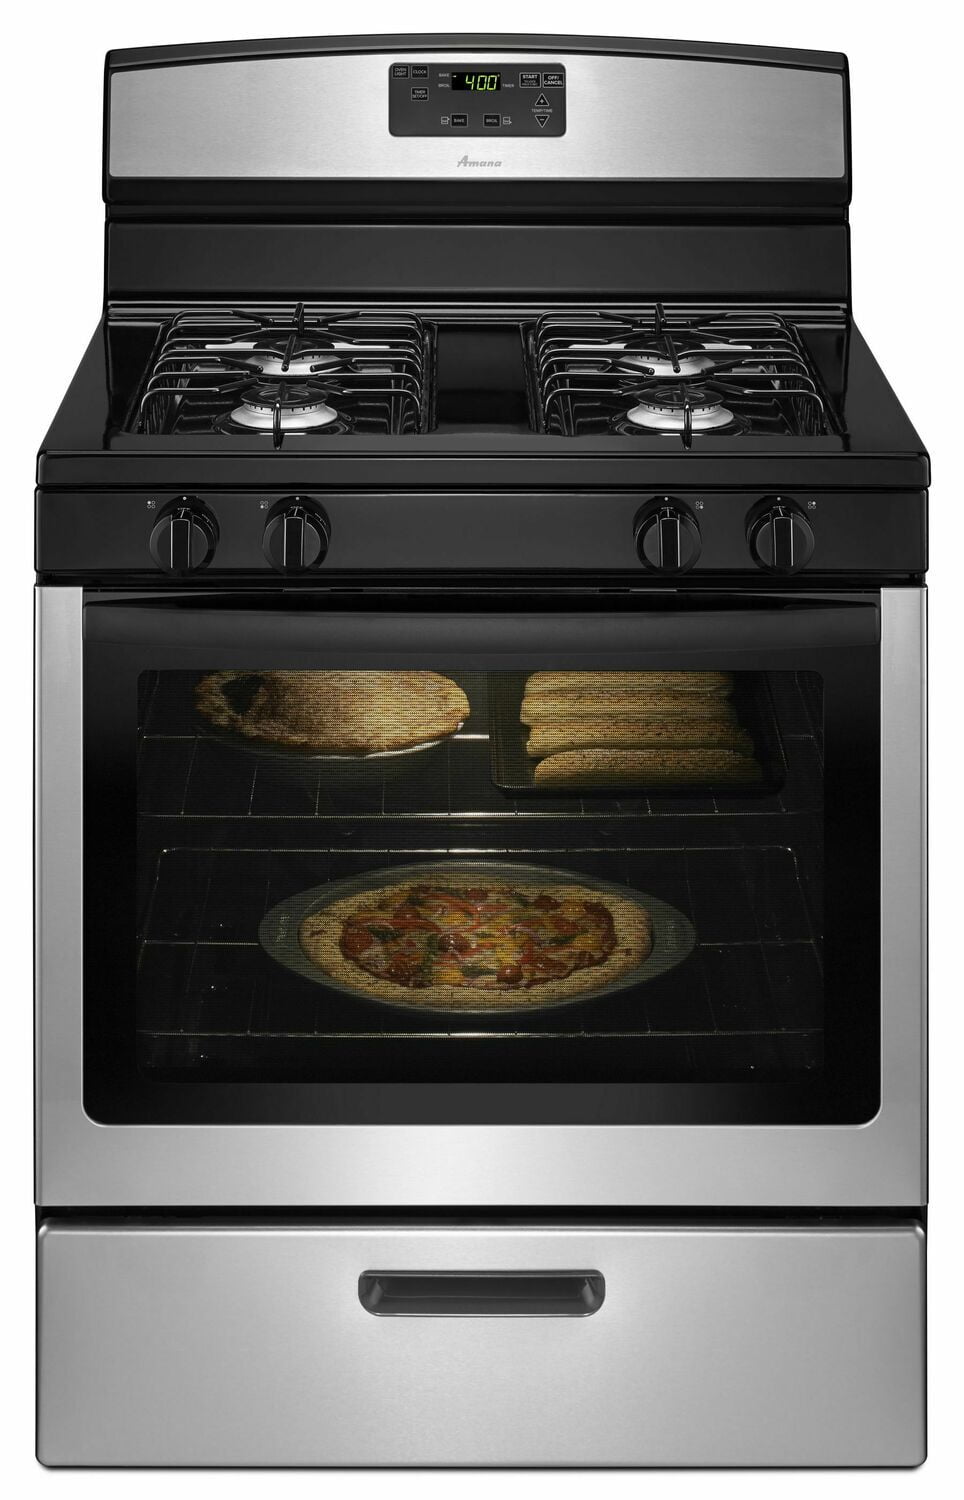 Amana AGR5330BAS 30-Inch Gas Range With Easy Touch Electronic Controls - Stainless Steel